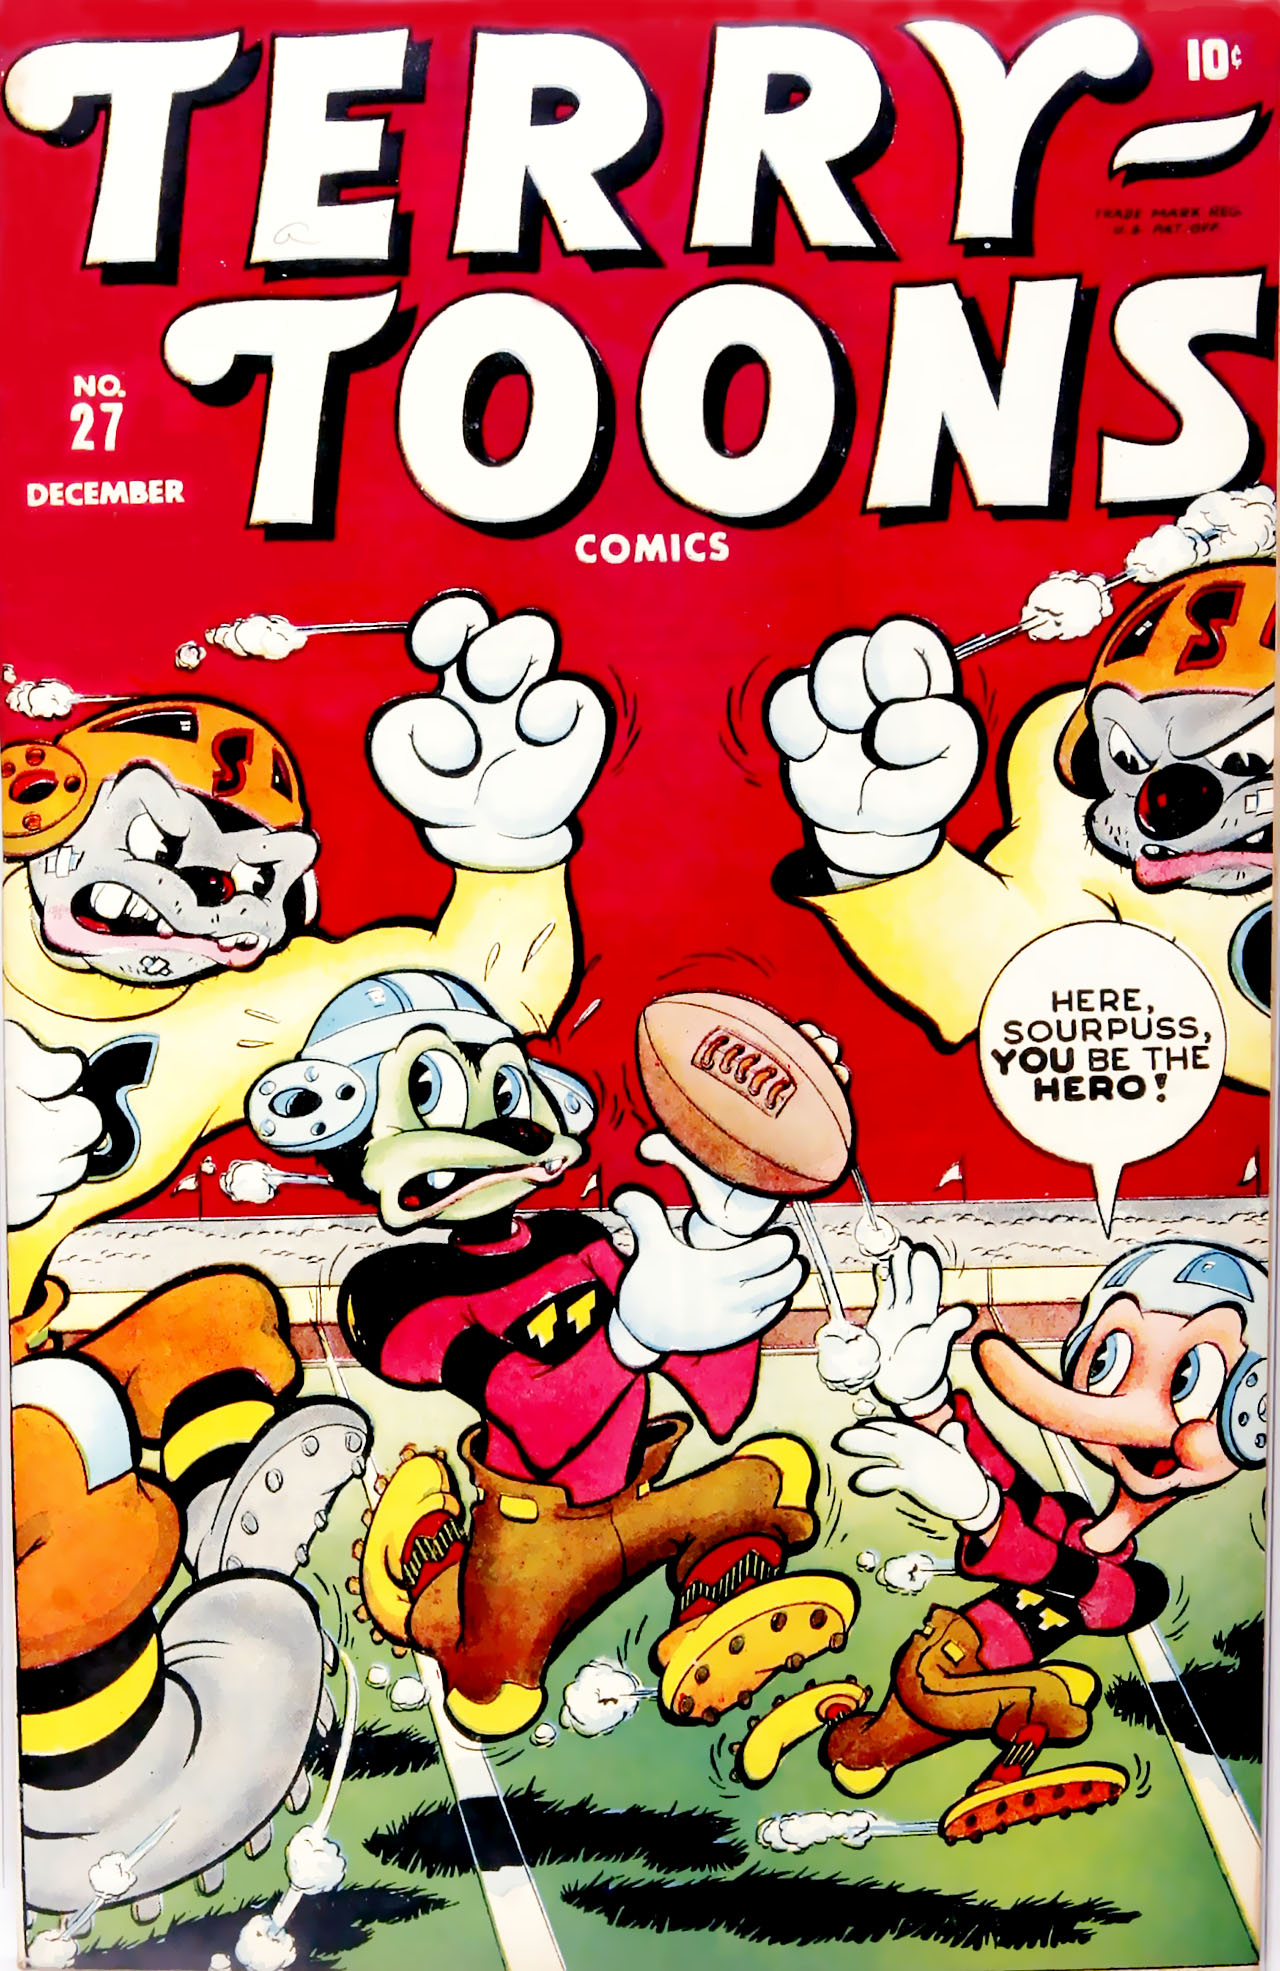 Read online Terry-Toons Comics comic -  Issue #27 - 1